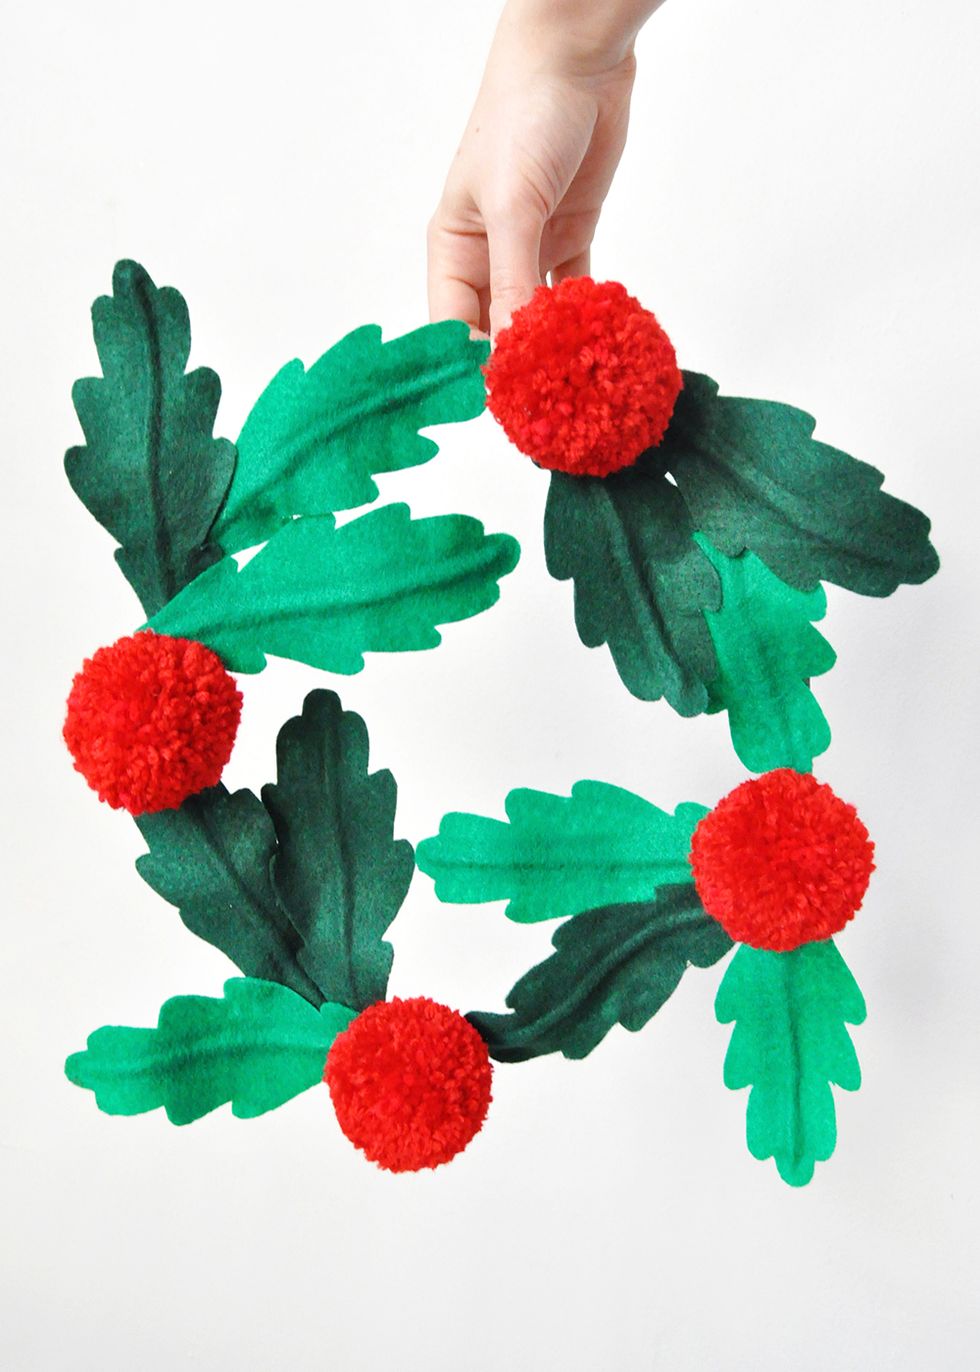 xmas wreath with pine cones, red and gold colored toys